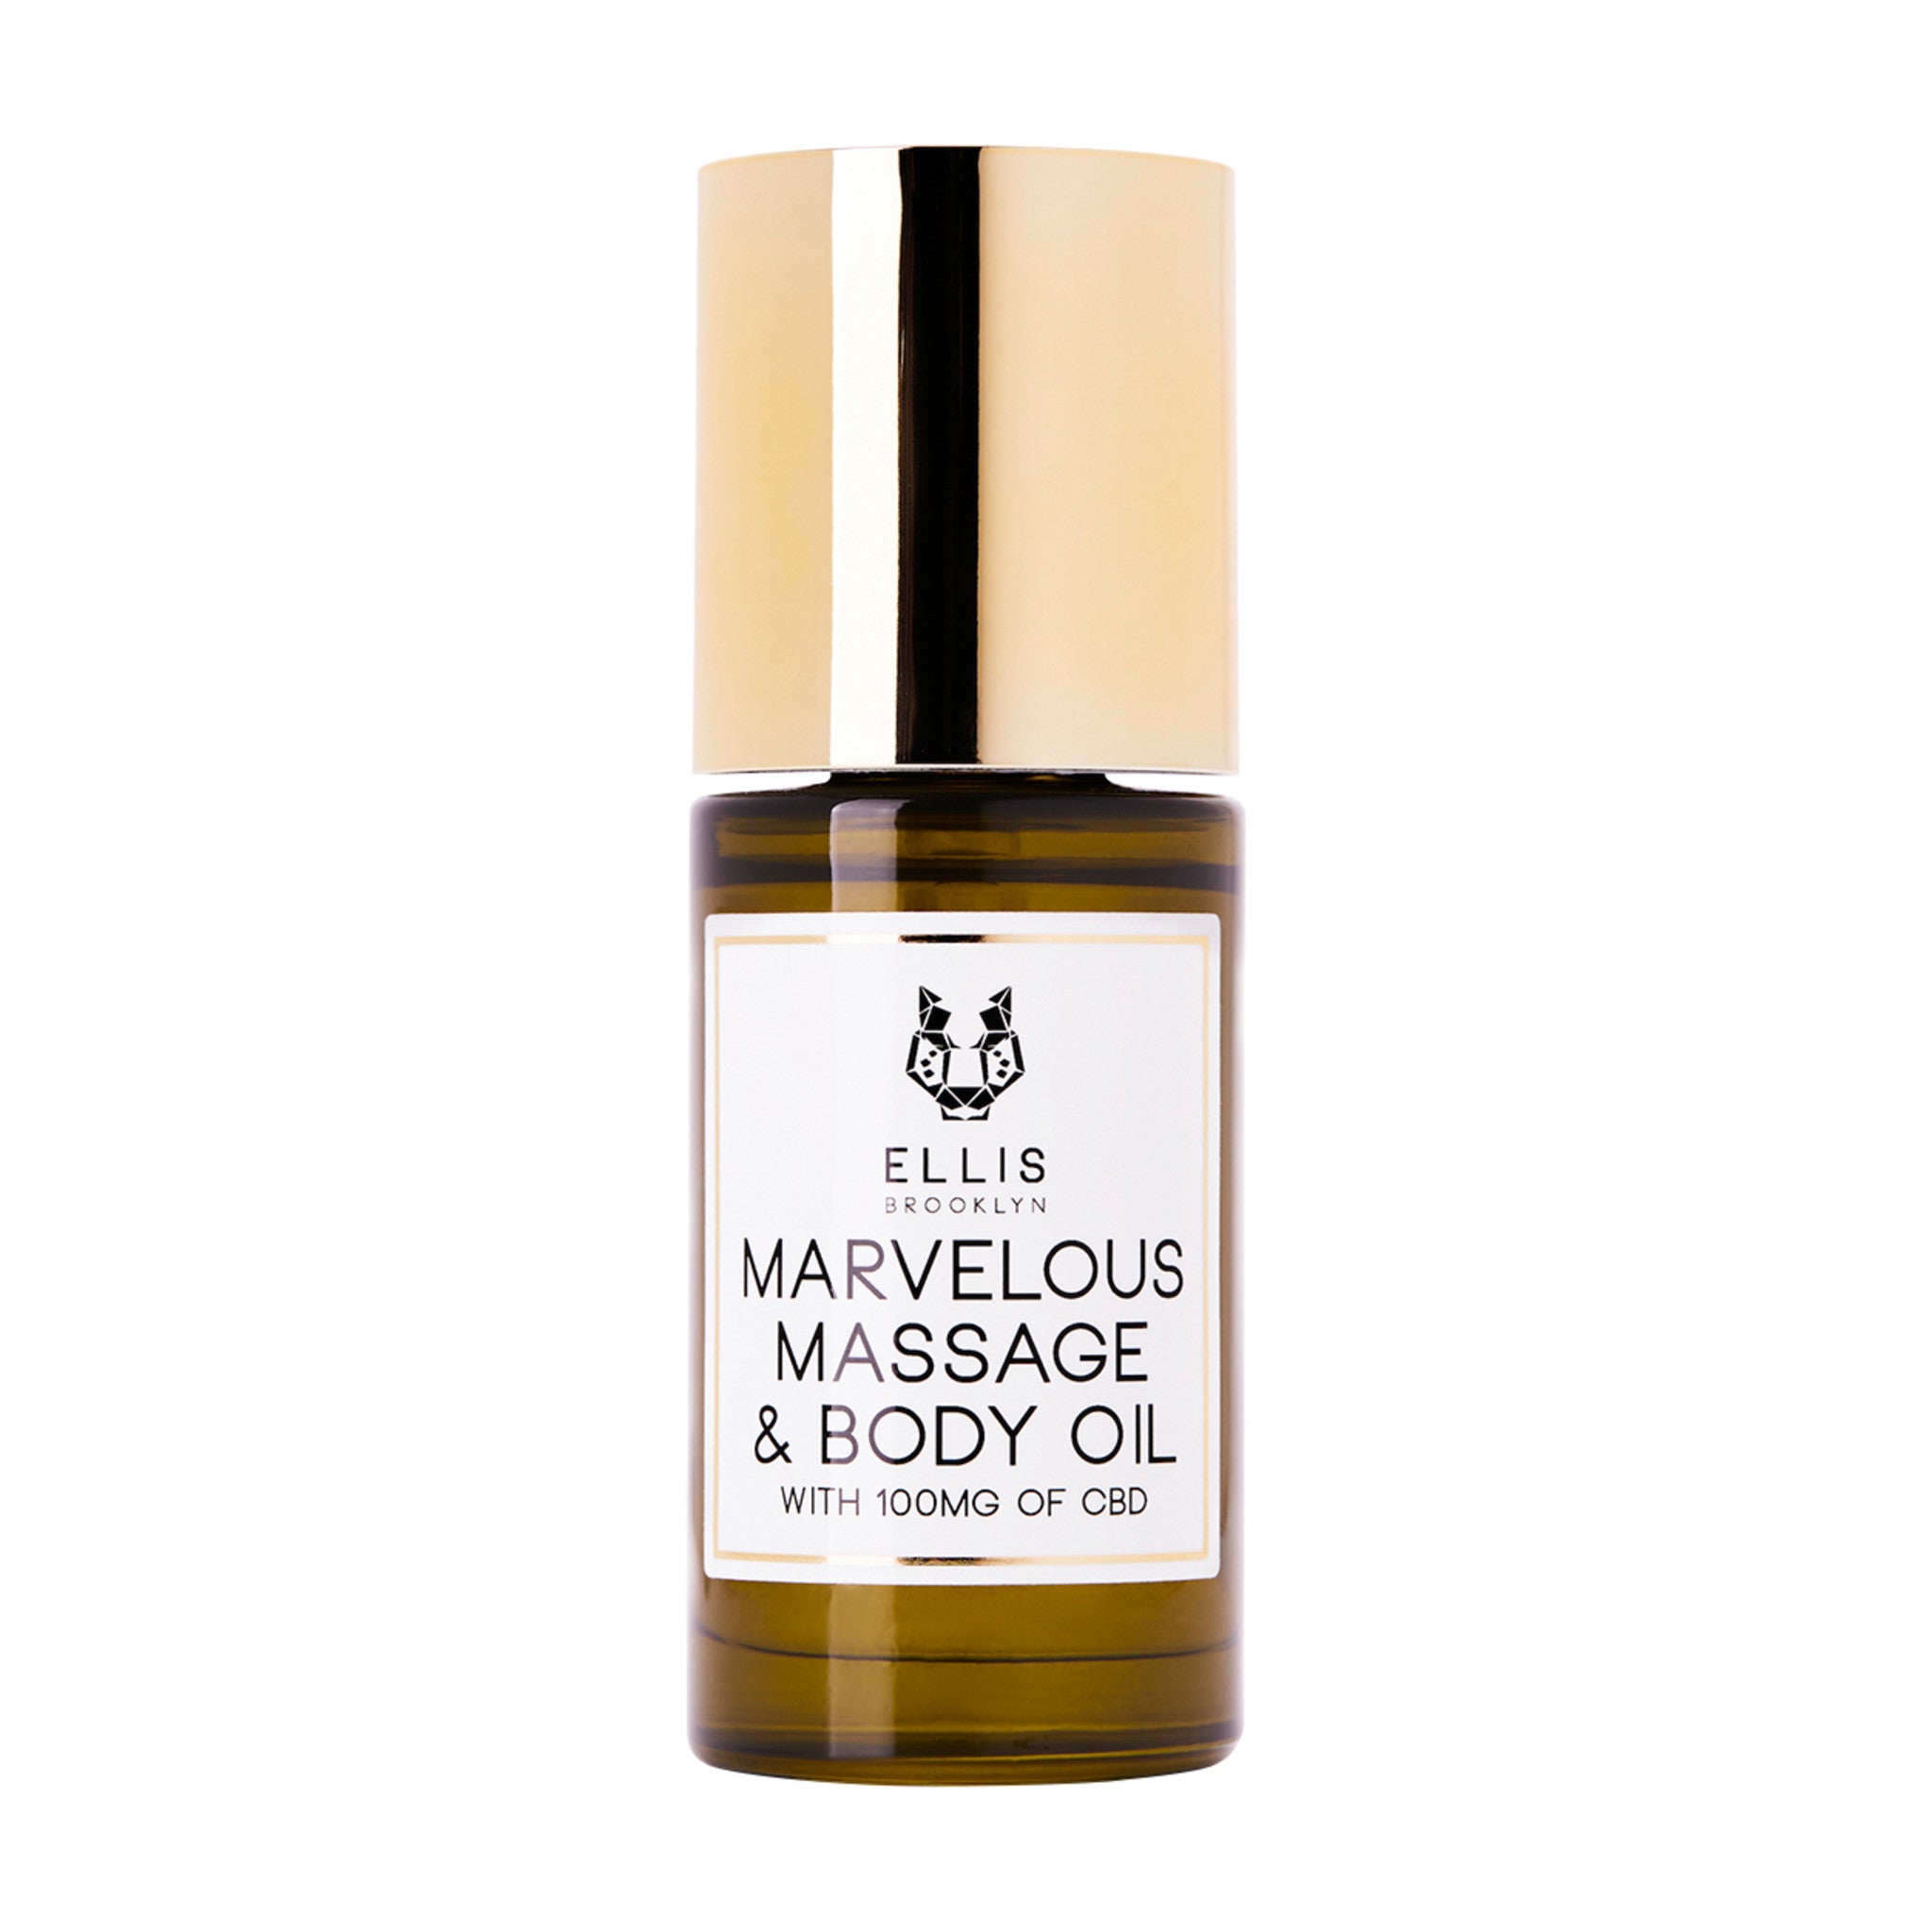 Ellis Brooklyn Marvelous Massage and Body Oil With 100mg of Full Spectrum CBD Size variant: 1 fl oz | 30 ml main image.